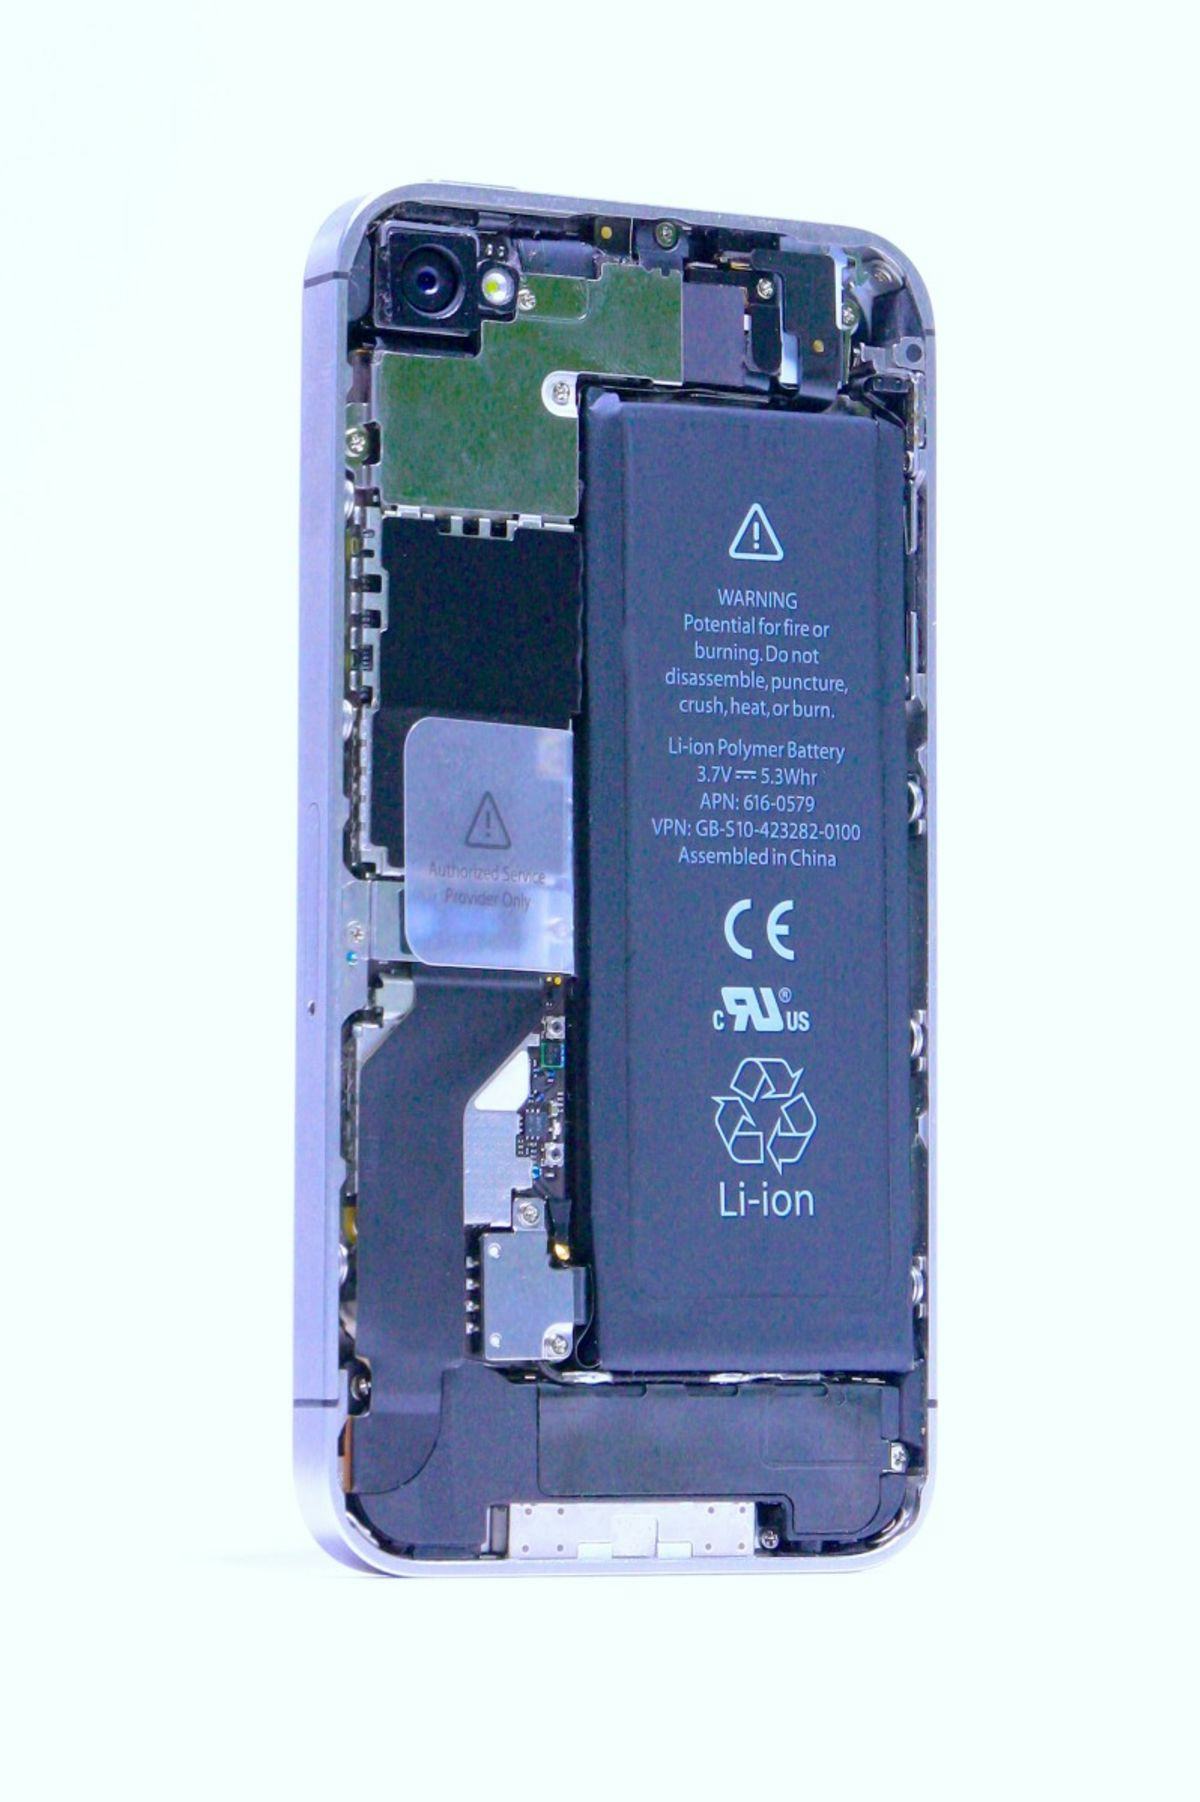 An opened smartphone, showing the battery inside